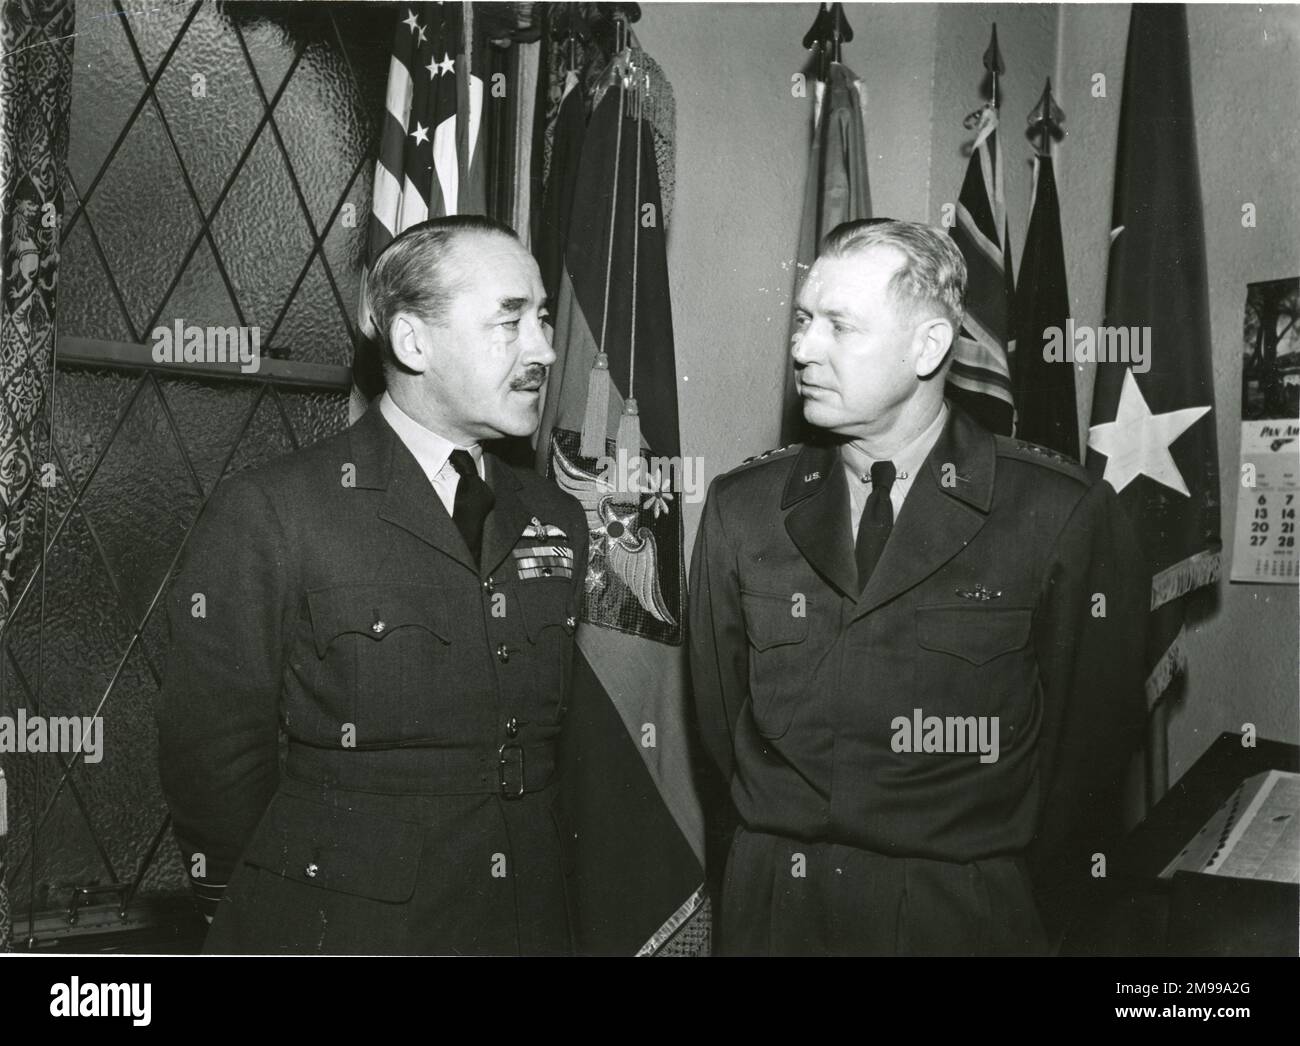 Air Marshal J.D.I. Hardman, OB, OBE, DFC, Chief of Air Staff, Royal Australian Air Force, called on General Weyland, Commanding General Far East Air Force, during a brief inspectional visit of Air Force installations in Japan and Korea. Photograph taken at Gen Weyland?s HQ in Tokyo. Stock Photo